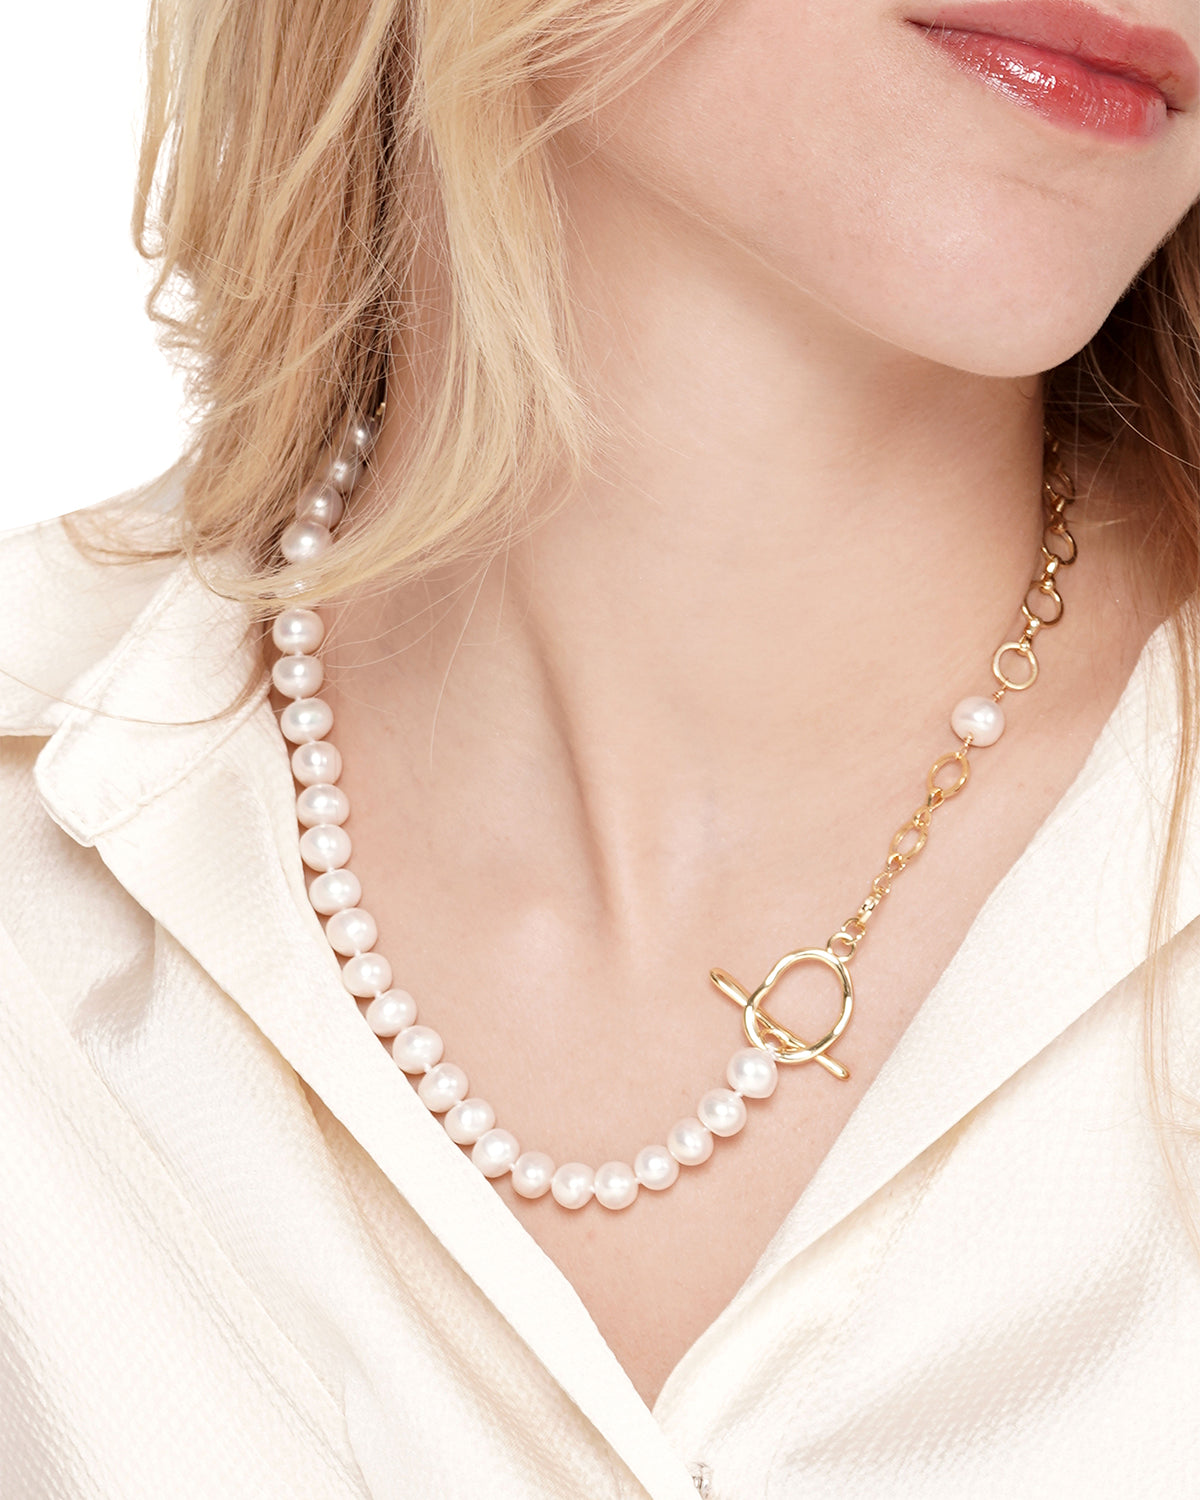 8-9mm White Freshwater Pearl & Chain Link Necklace